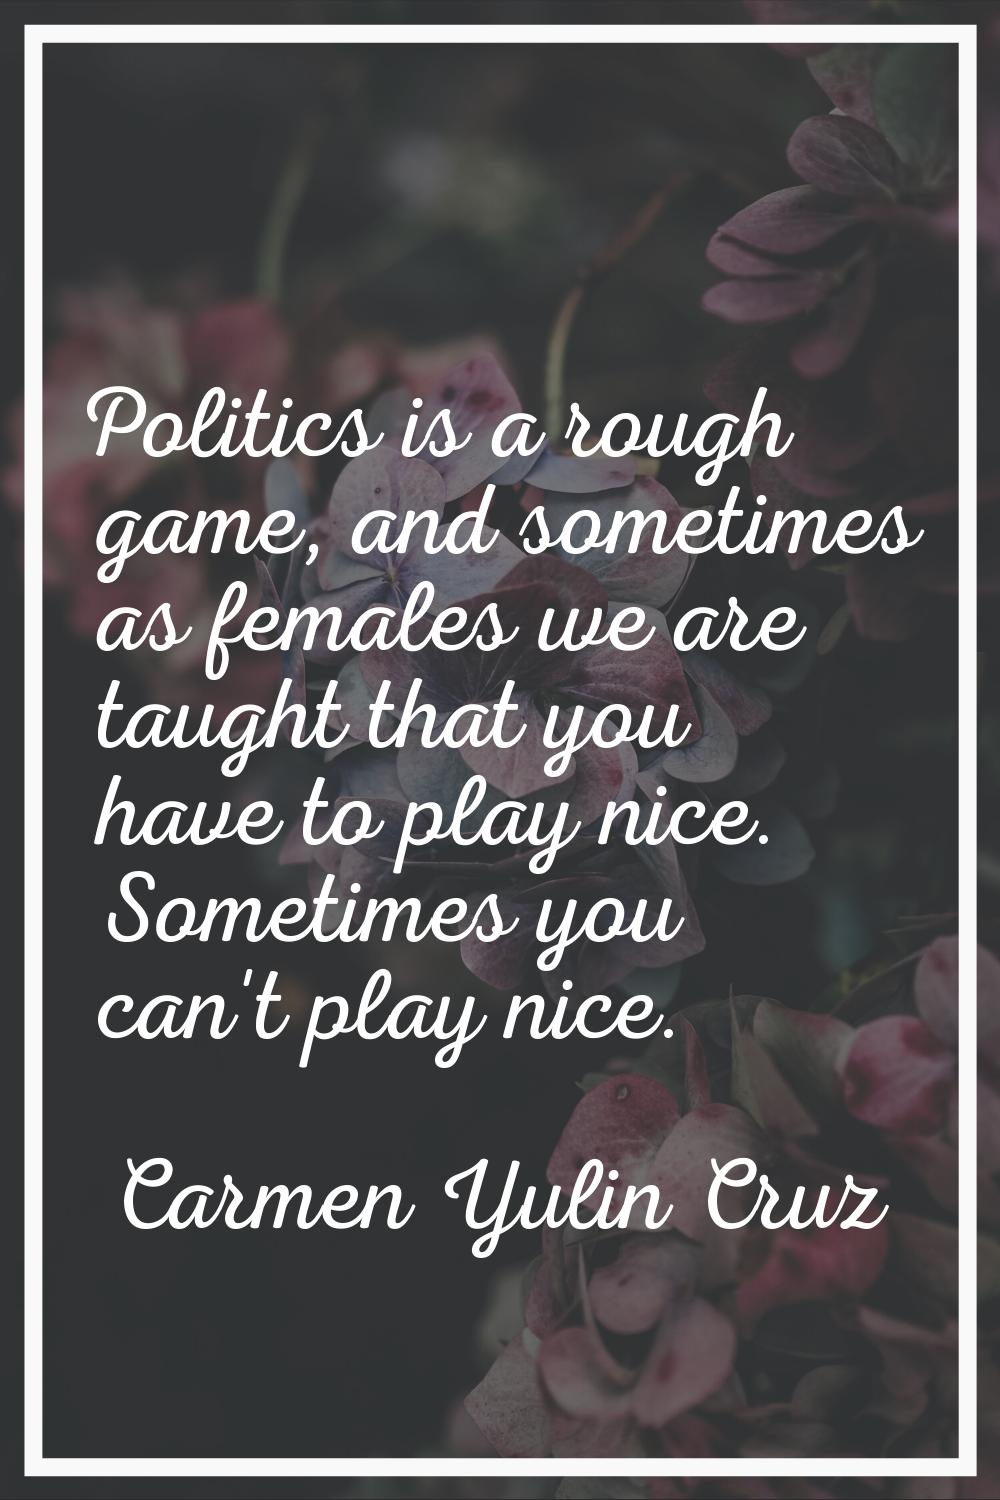 Politics is a rough game, and sometimes as females we are taught that you have to play nice. Someti